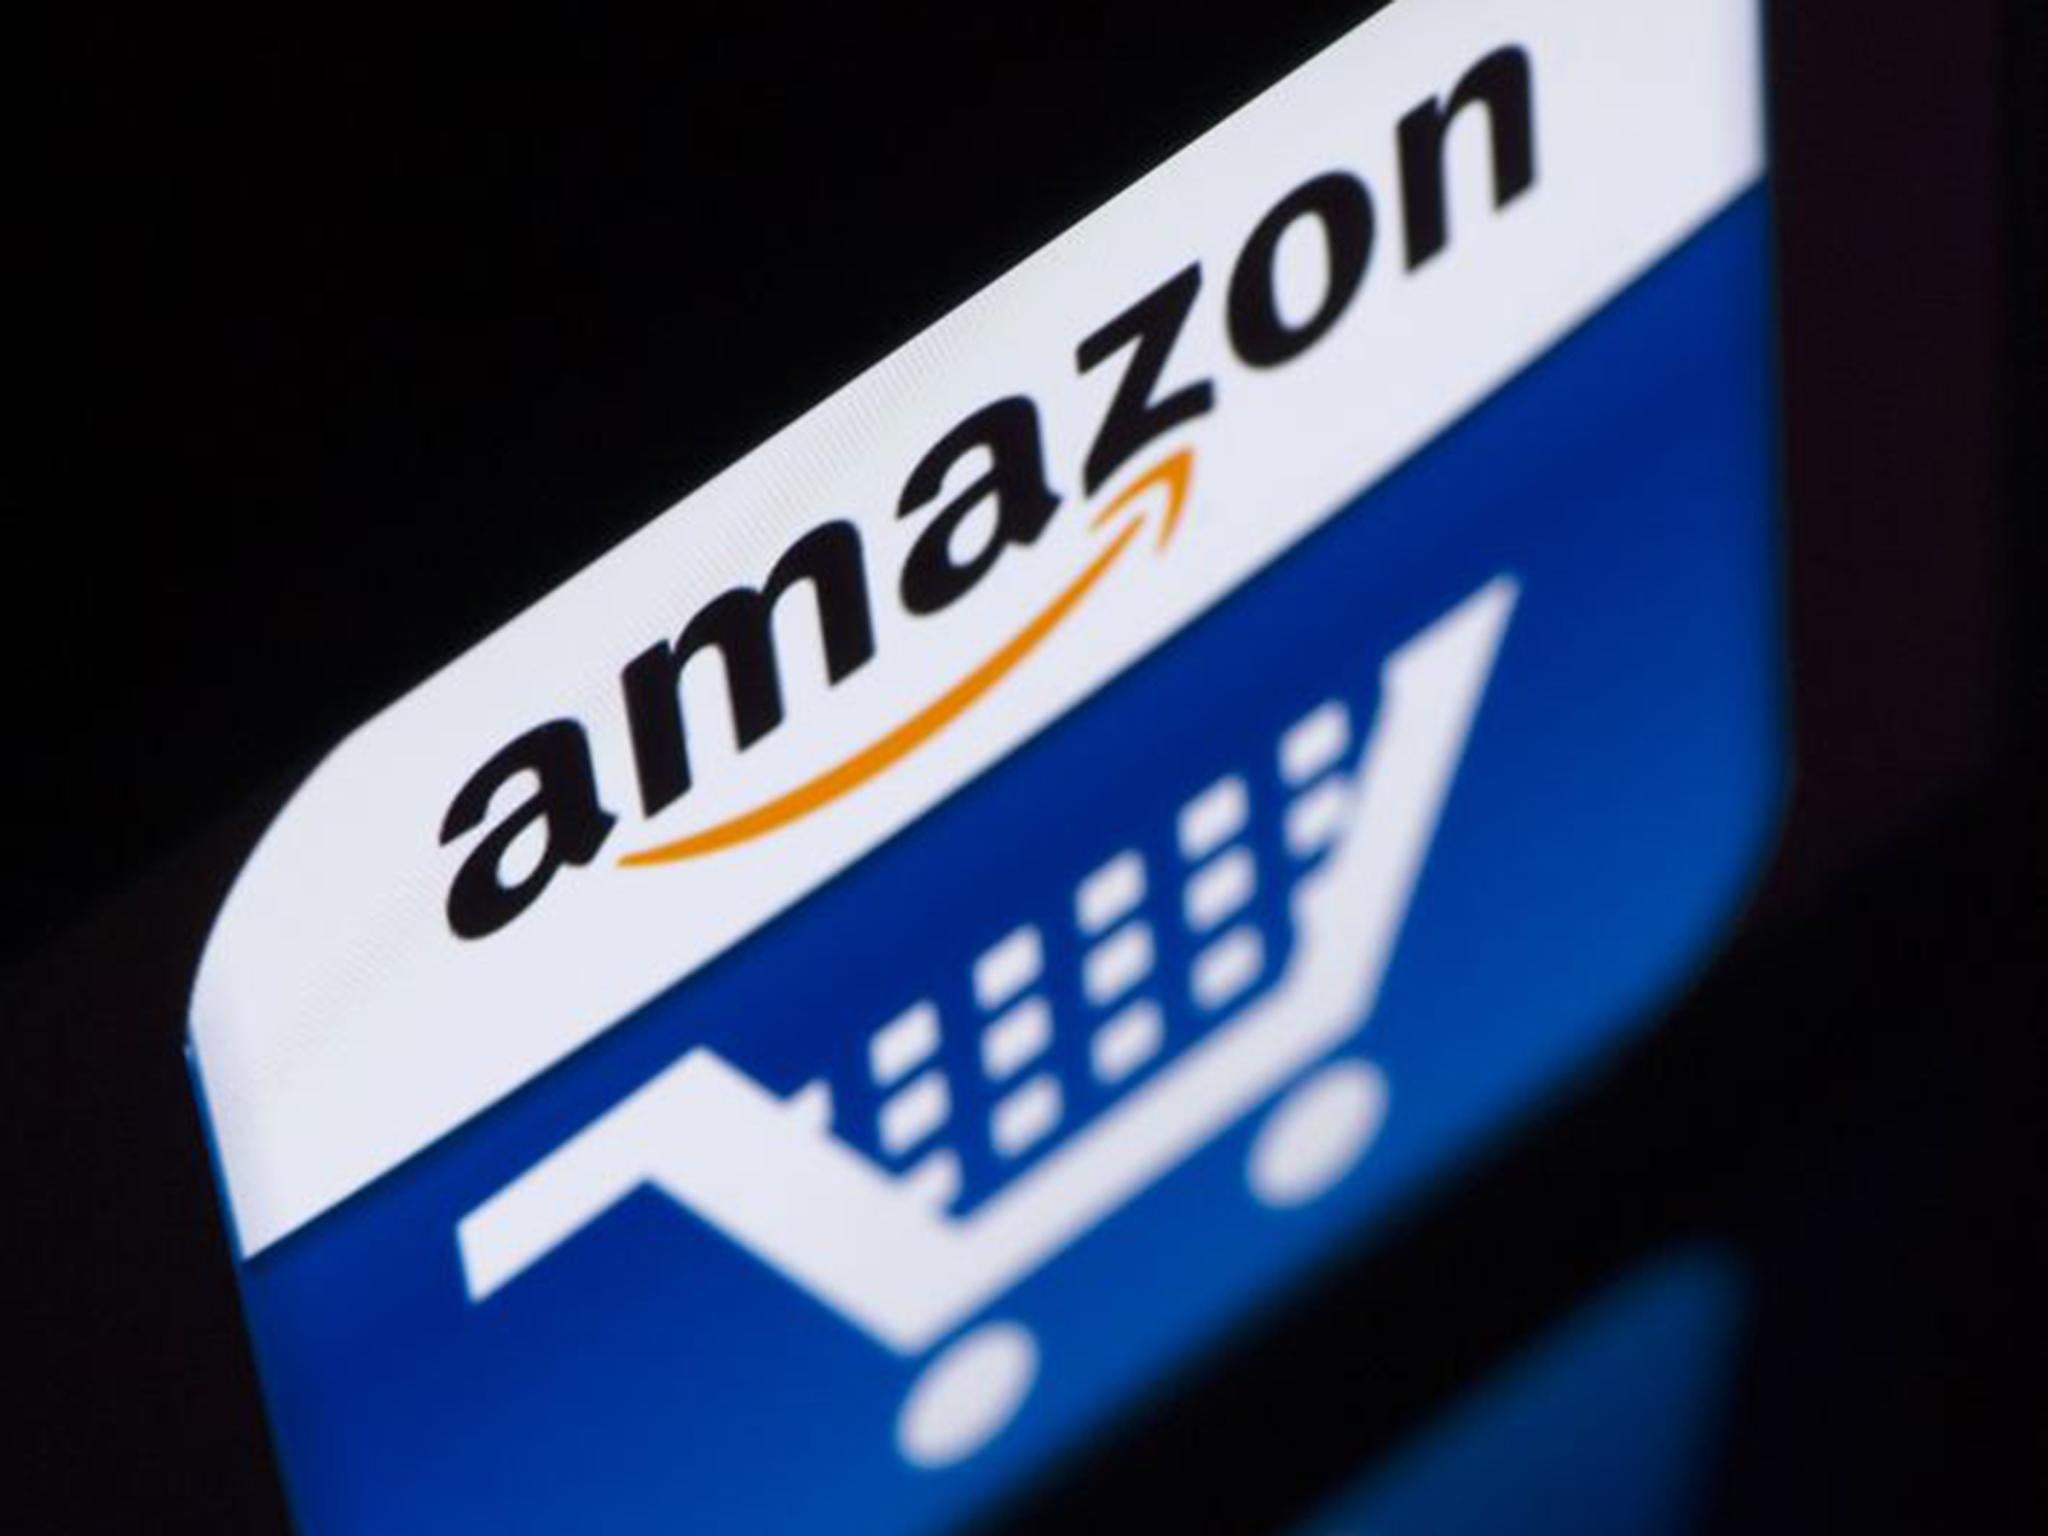 Huge online corporations such as Amazon are perceived to be paying absurdly low amounts of tax in the UK